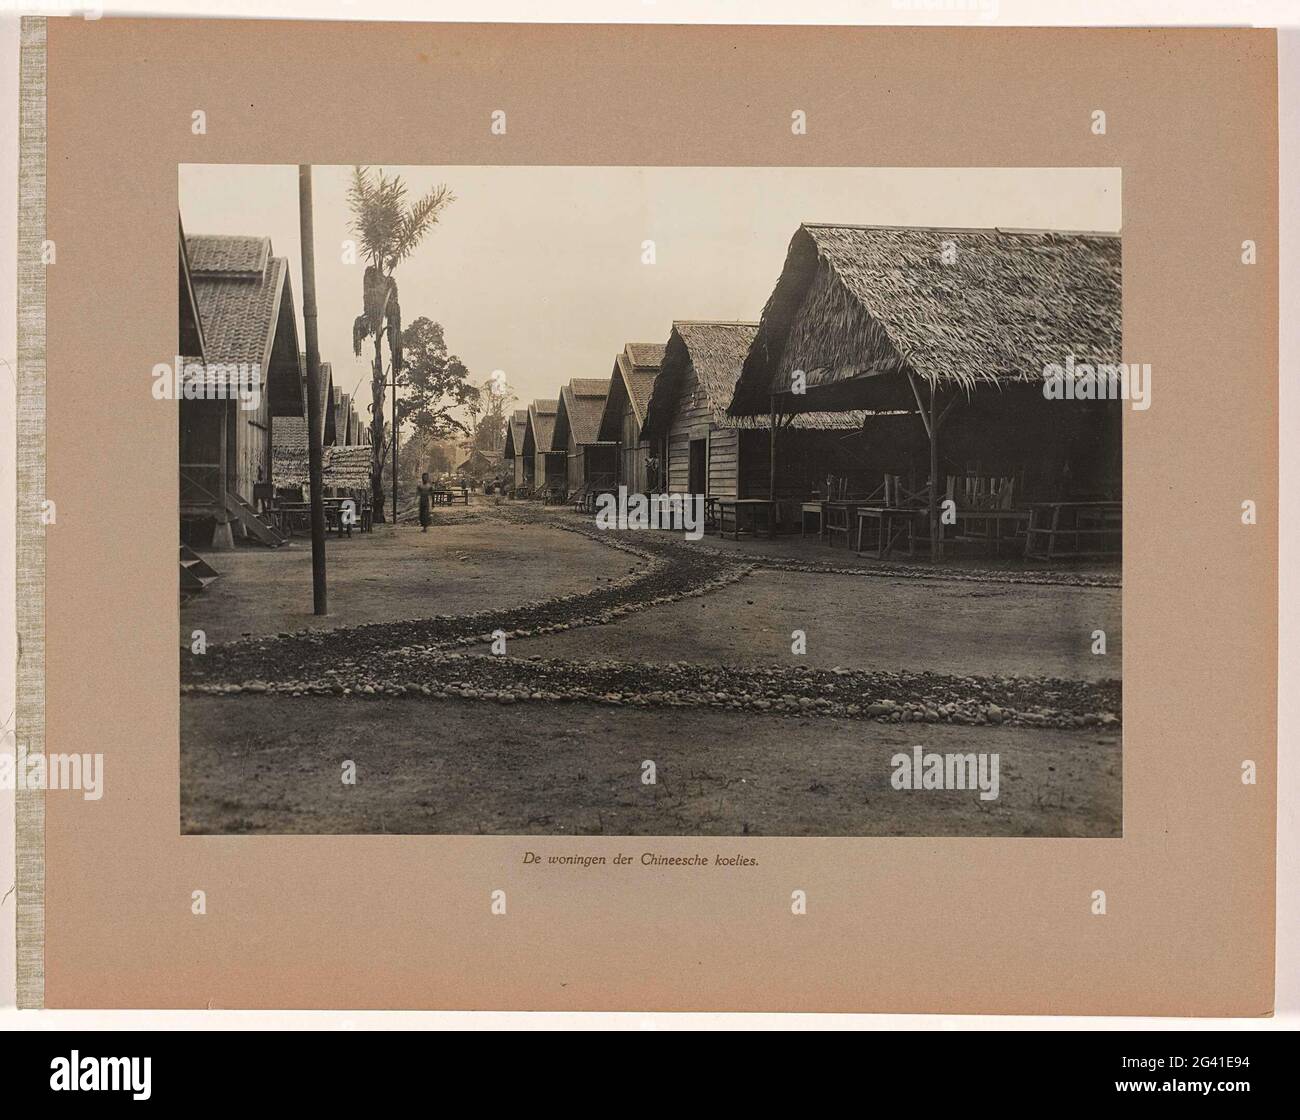 The houses of Chinese coolies. Street with the houses of the Chinese workers working at the mine. Part of the loose-leaf photo album offered by the staff of the Boekit-ASAM coal mines on Sumatra on the separating engineer director H. Tromp on January 7, 1922. Stock Photo